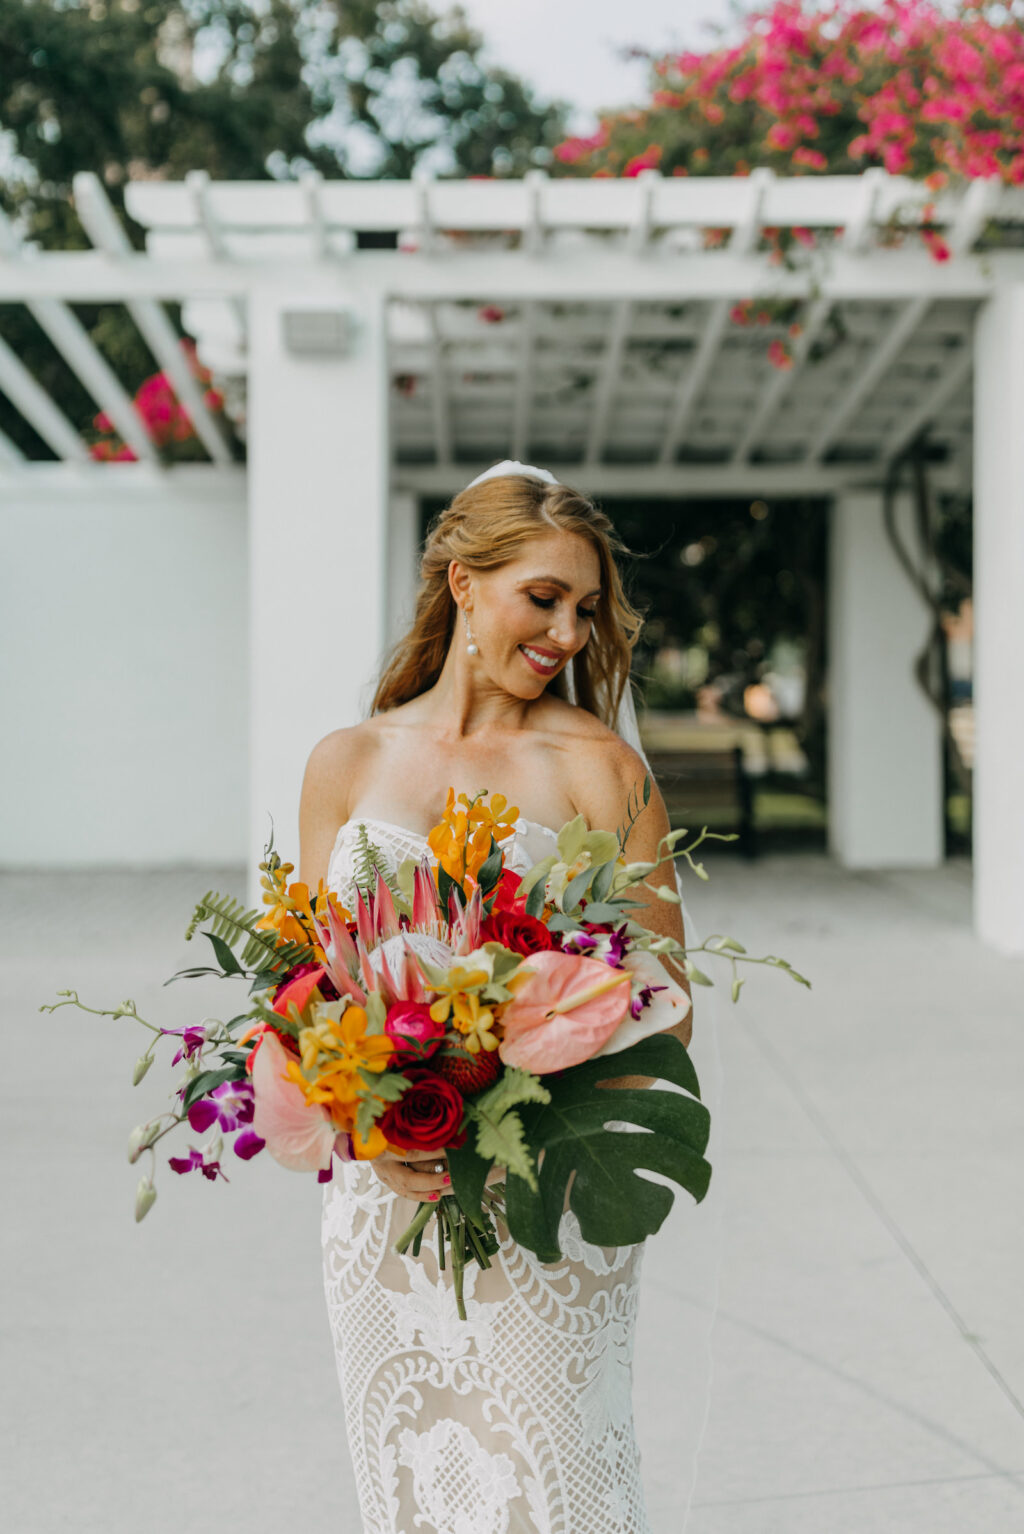 Boho Bride Holding Tropical Colorful Floral Bouquet, King Protea, Monstera Palm Leaf, Purple Orchids, Red Roses, Pink Anthurium, Orange Flowers | Tampa Bay Wedding Photographer Amber McWhorter Photography | Wedding Hair and Makeup Femme Akoi Beauty Studio